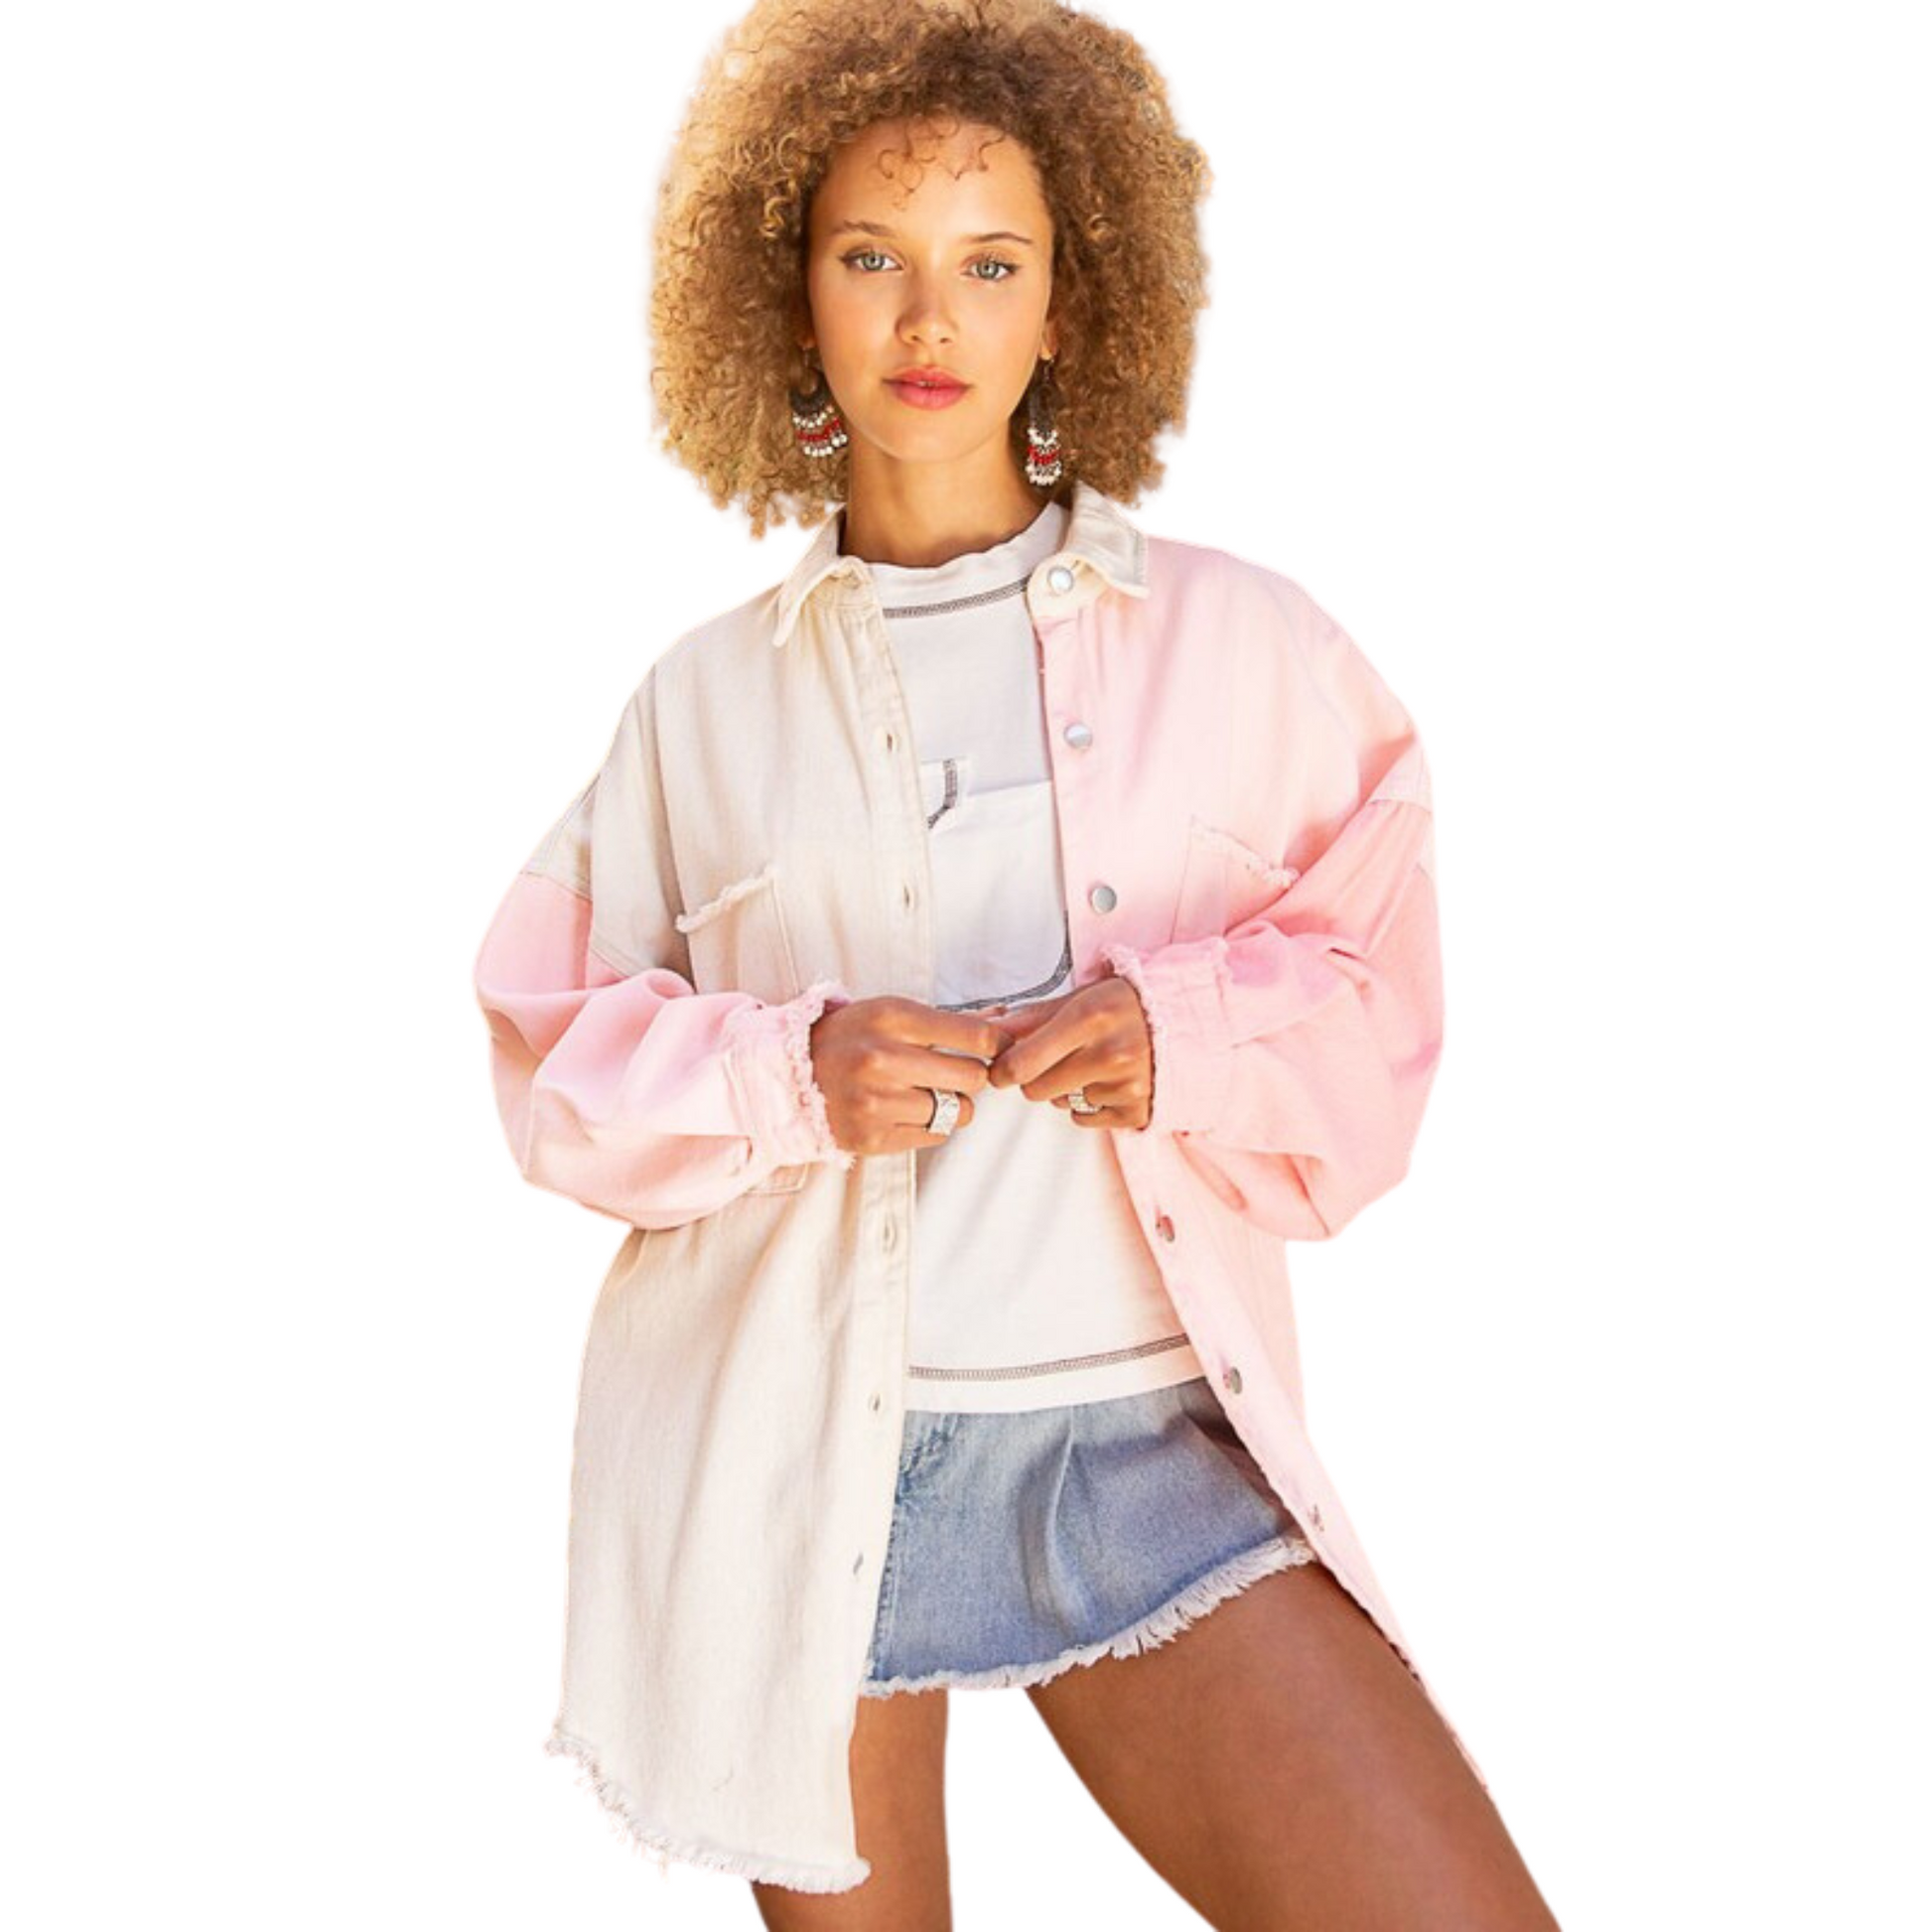 Experience the perfect mix of classic and modern styling with this pink sleeve denim jacket. Crafted from white denim fabric, it features a timeless button-up design. Elevate any look and make a statement with this fashionable and timeless piece.